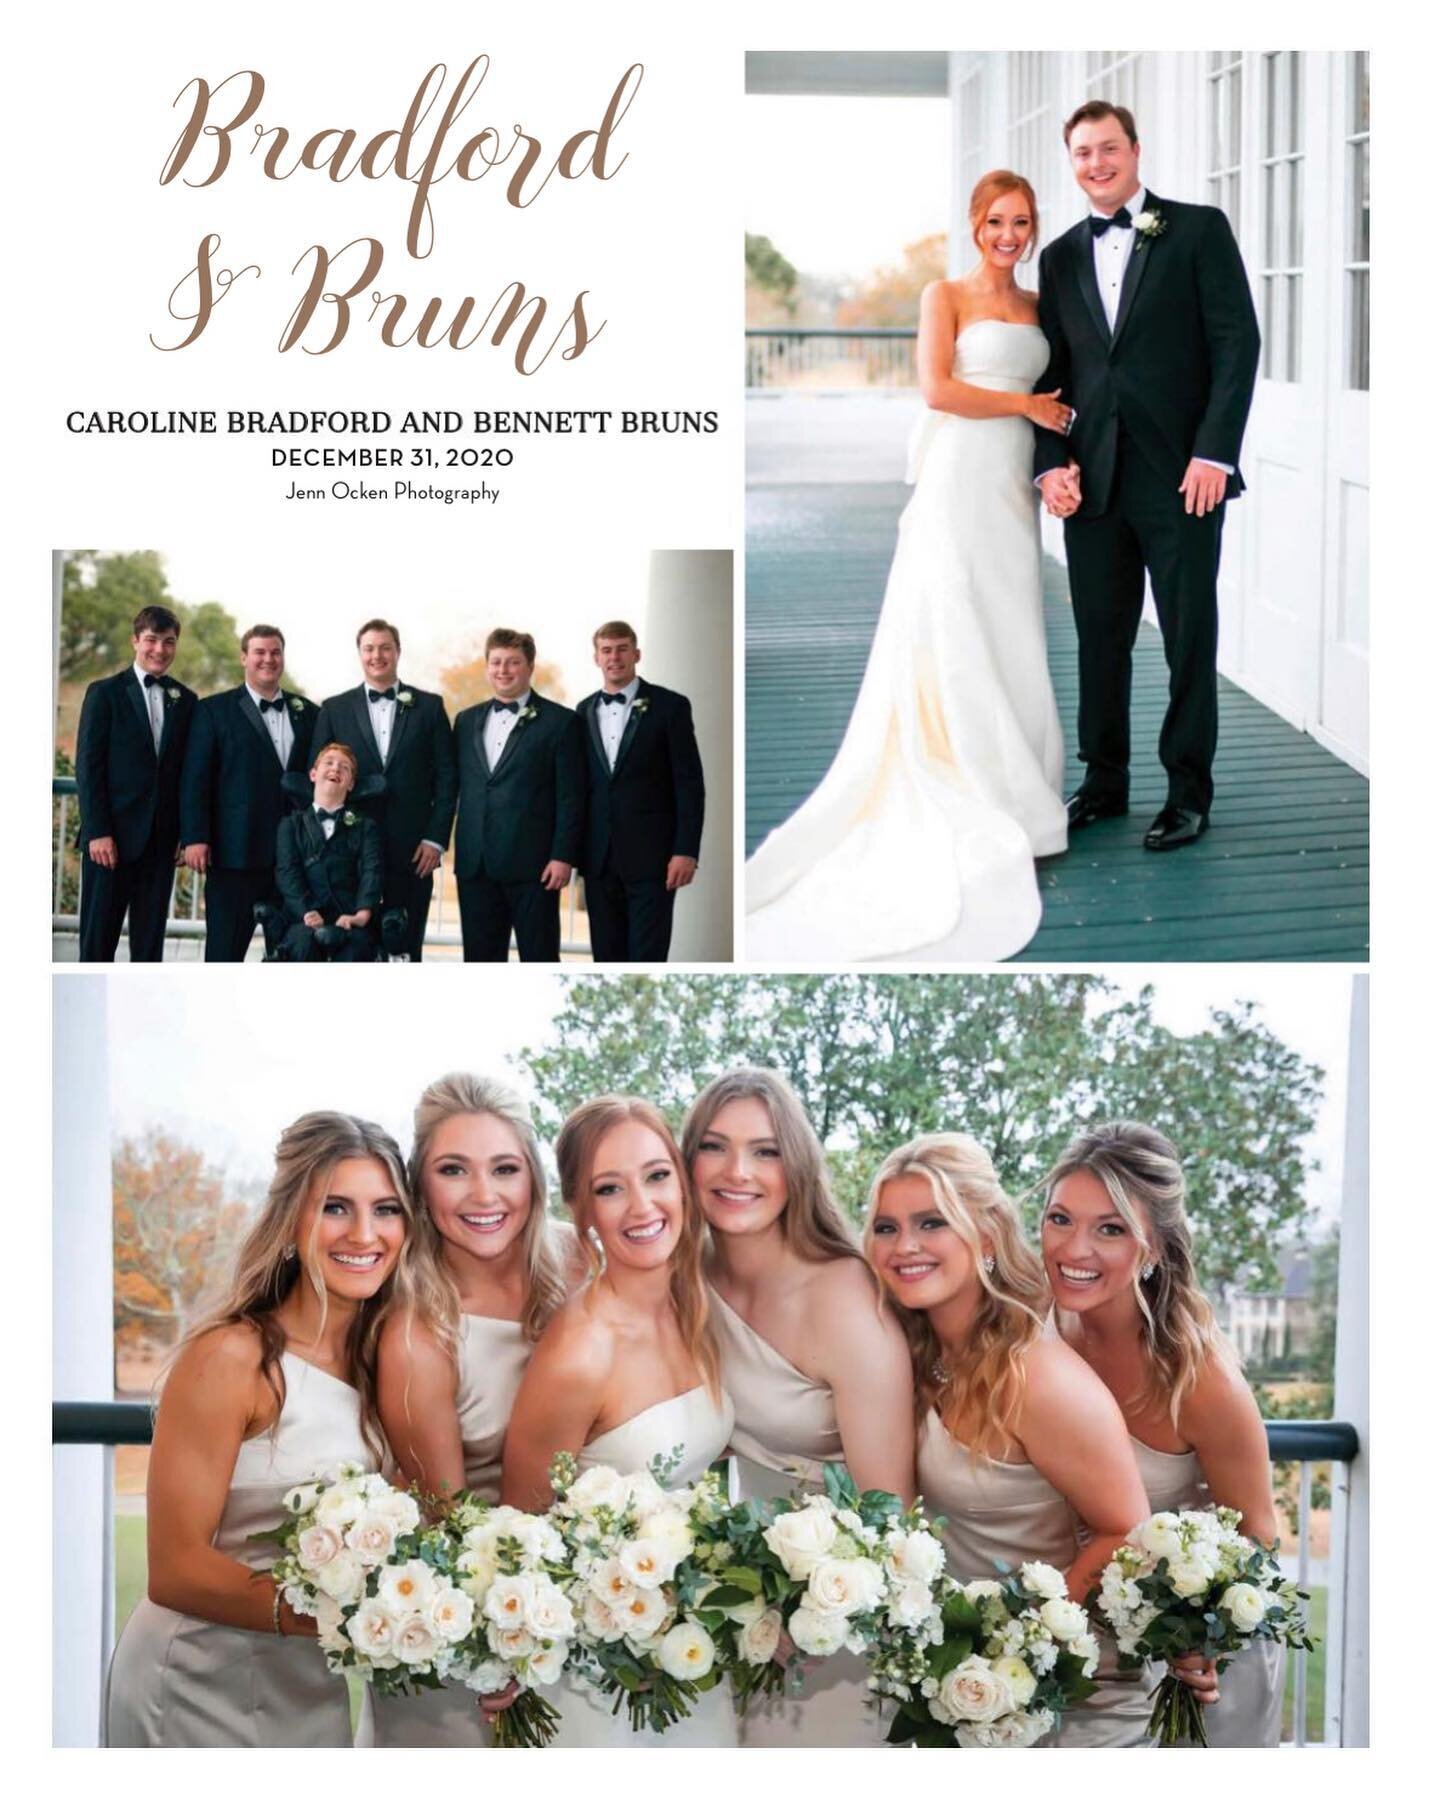 8 of our weddings were featured in the 2021-2022 inRegister Weddings issue. We love seeing our couples&rsquo; pics from their big day 🤩. We hope one day menswear will get there own vendor category; the groom &amp; groomsmen attire is just as importa